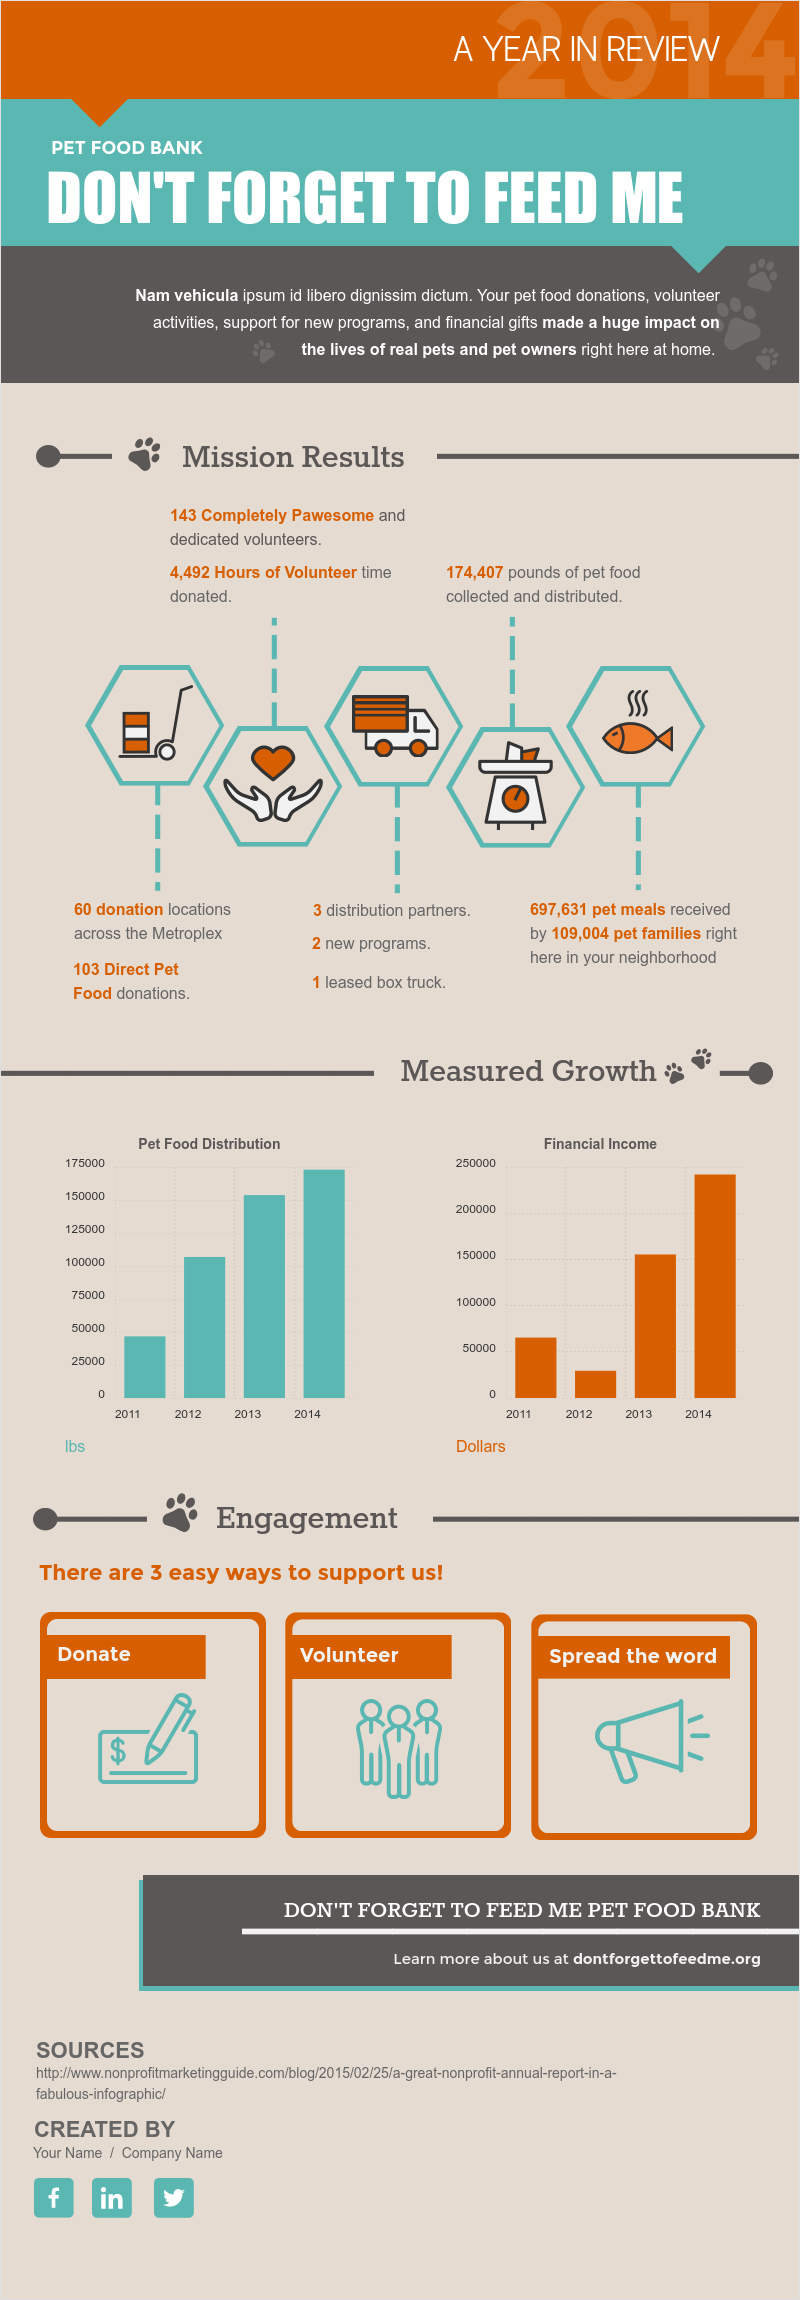 Visme Introduces New Infographic Templates for NonProfits and Businesses Visual Learning